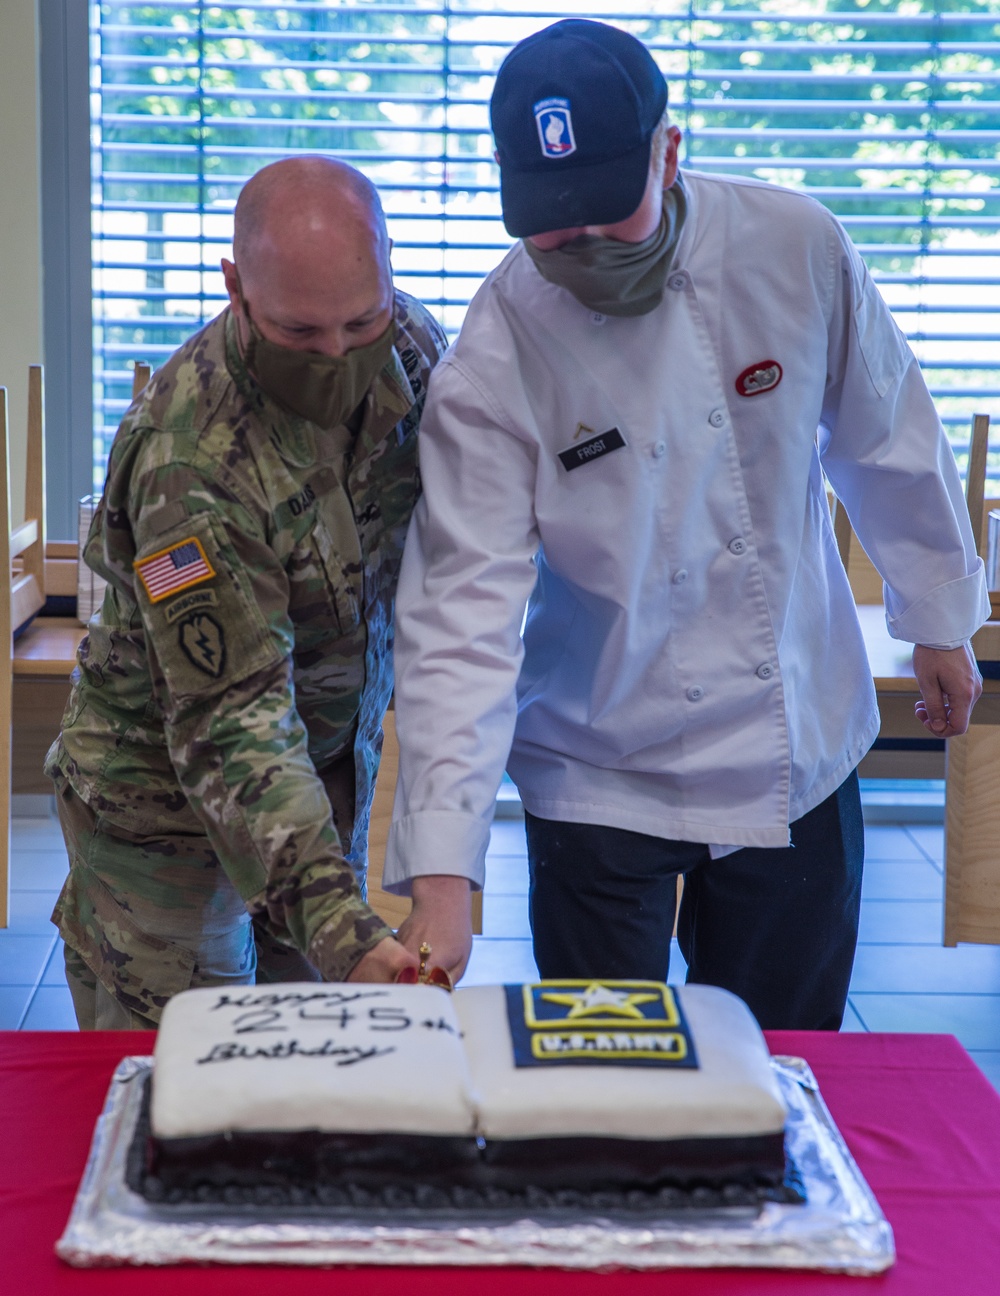 Soldiers cut Army's 245th birthday cake